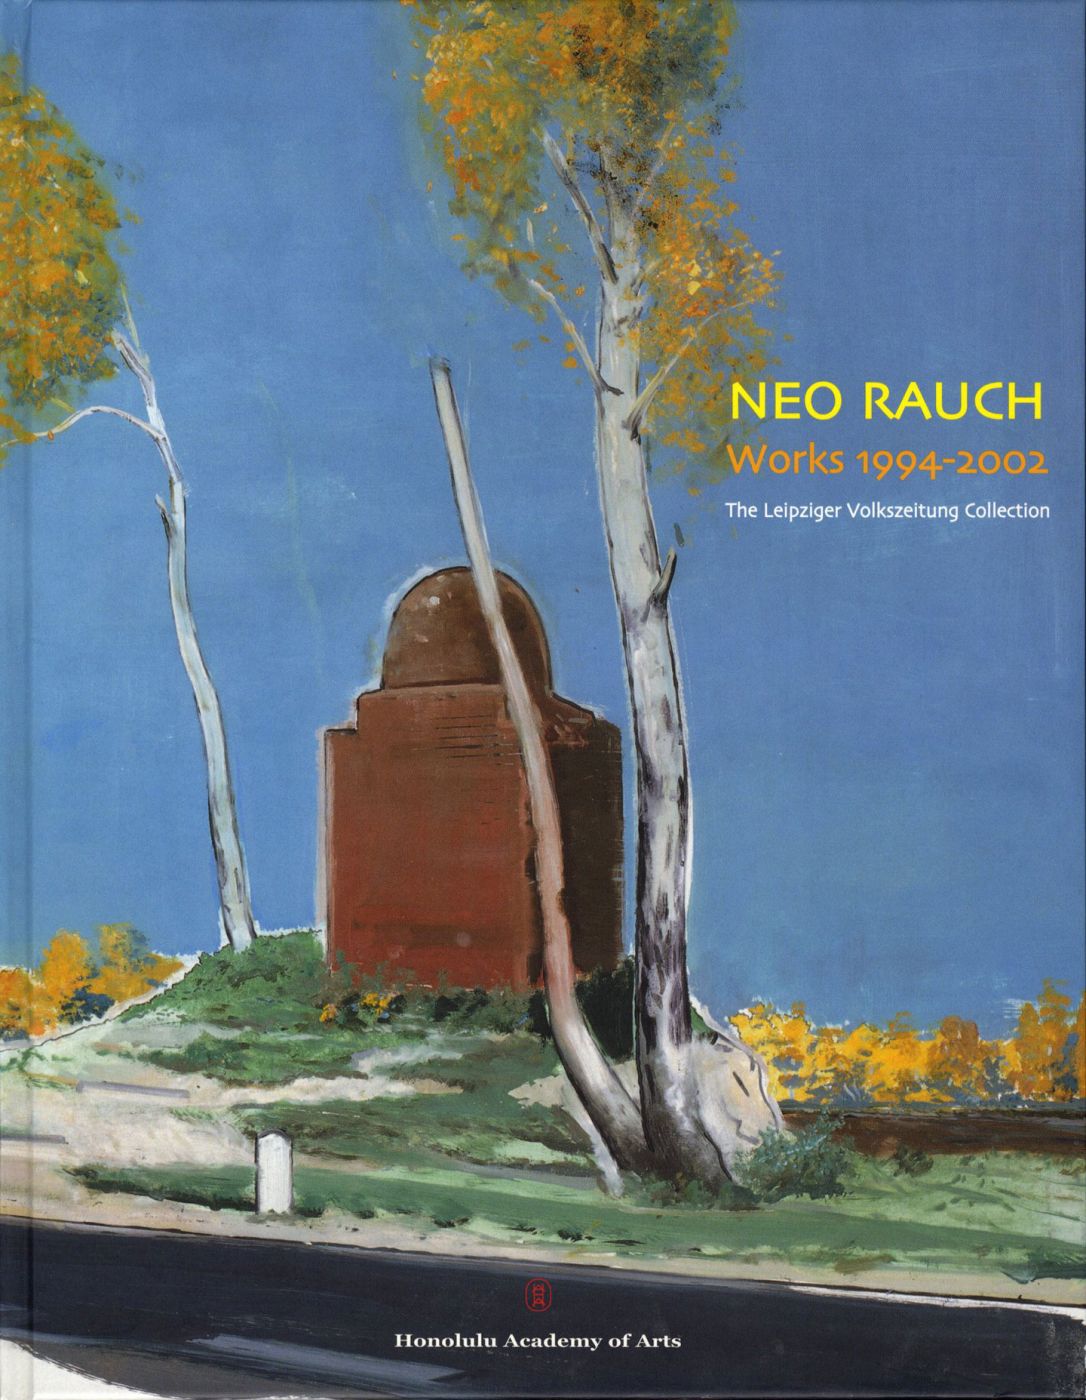 Neo Rauch: Works 1994-2002 - The Leipziger Volkszeitung Collection [SIGNED]